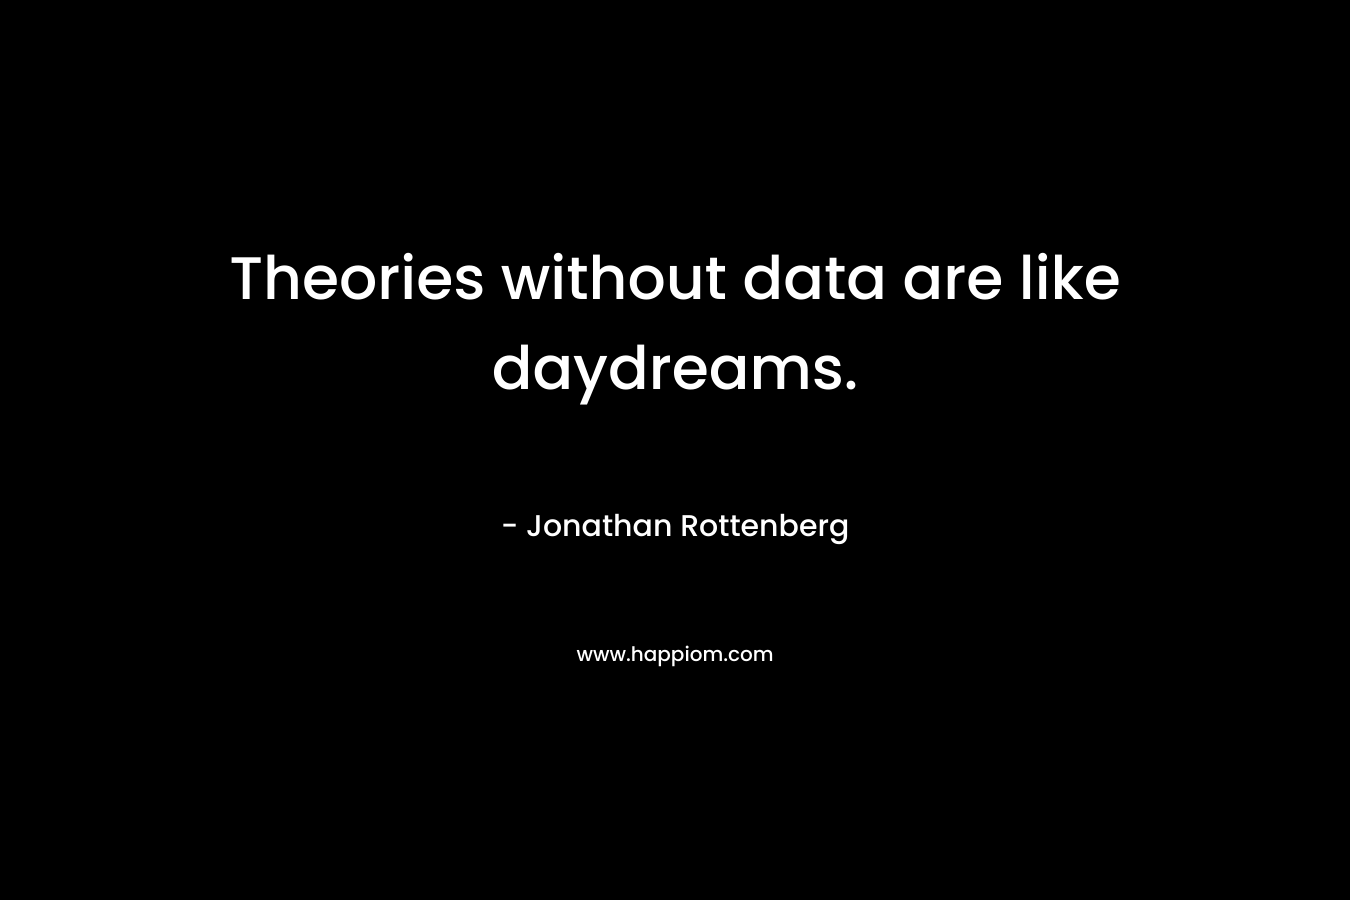 Theories without data are like daydreams. – Jonathan Rottenberg